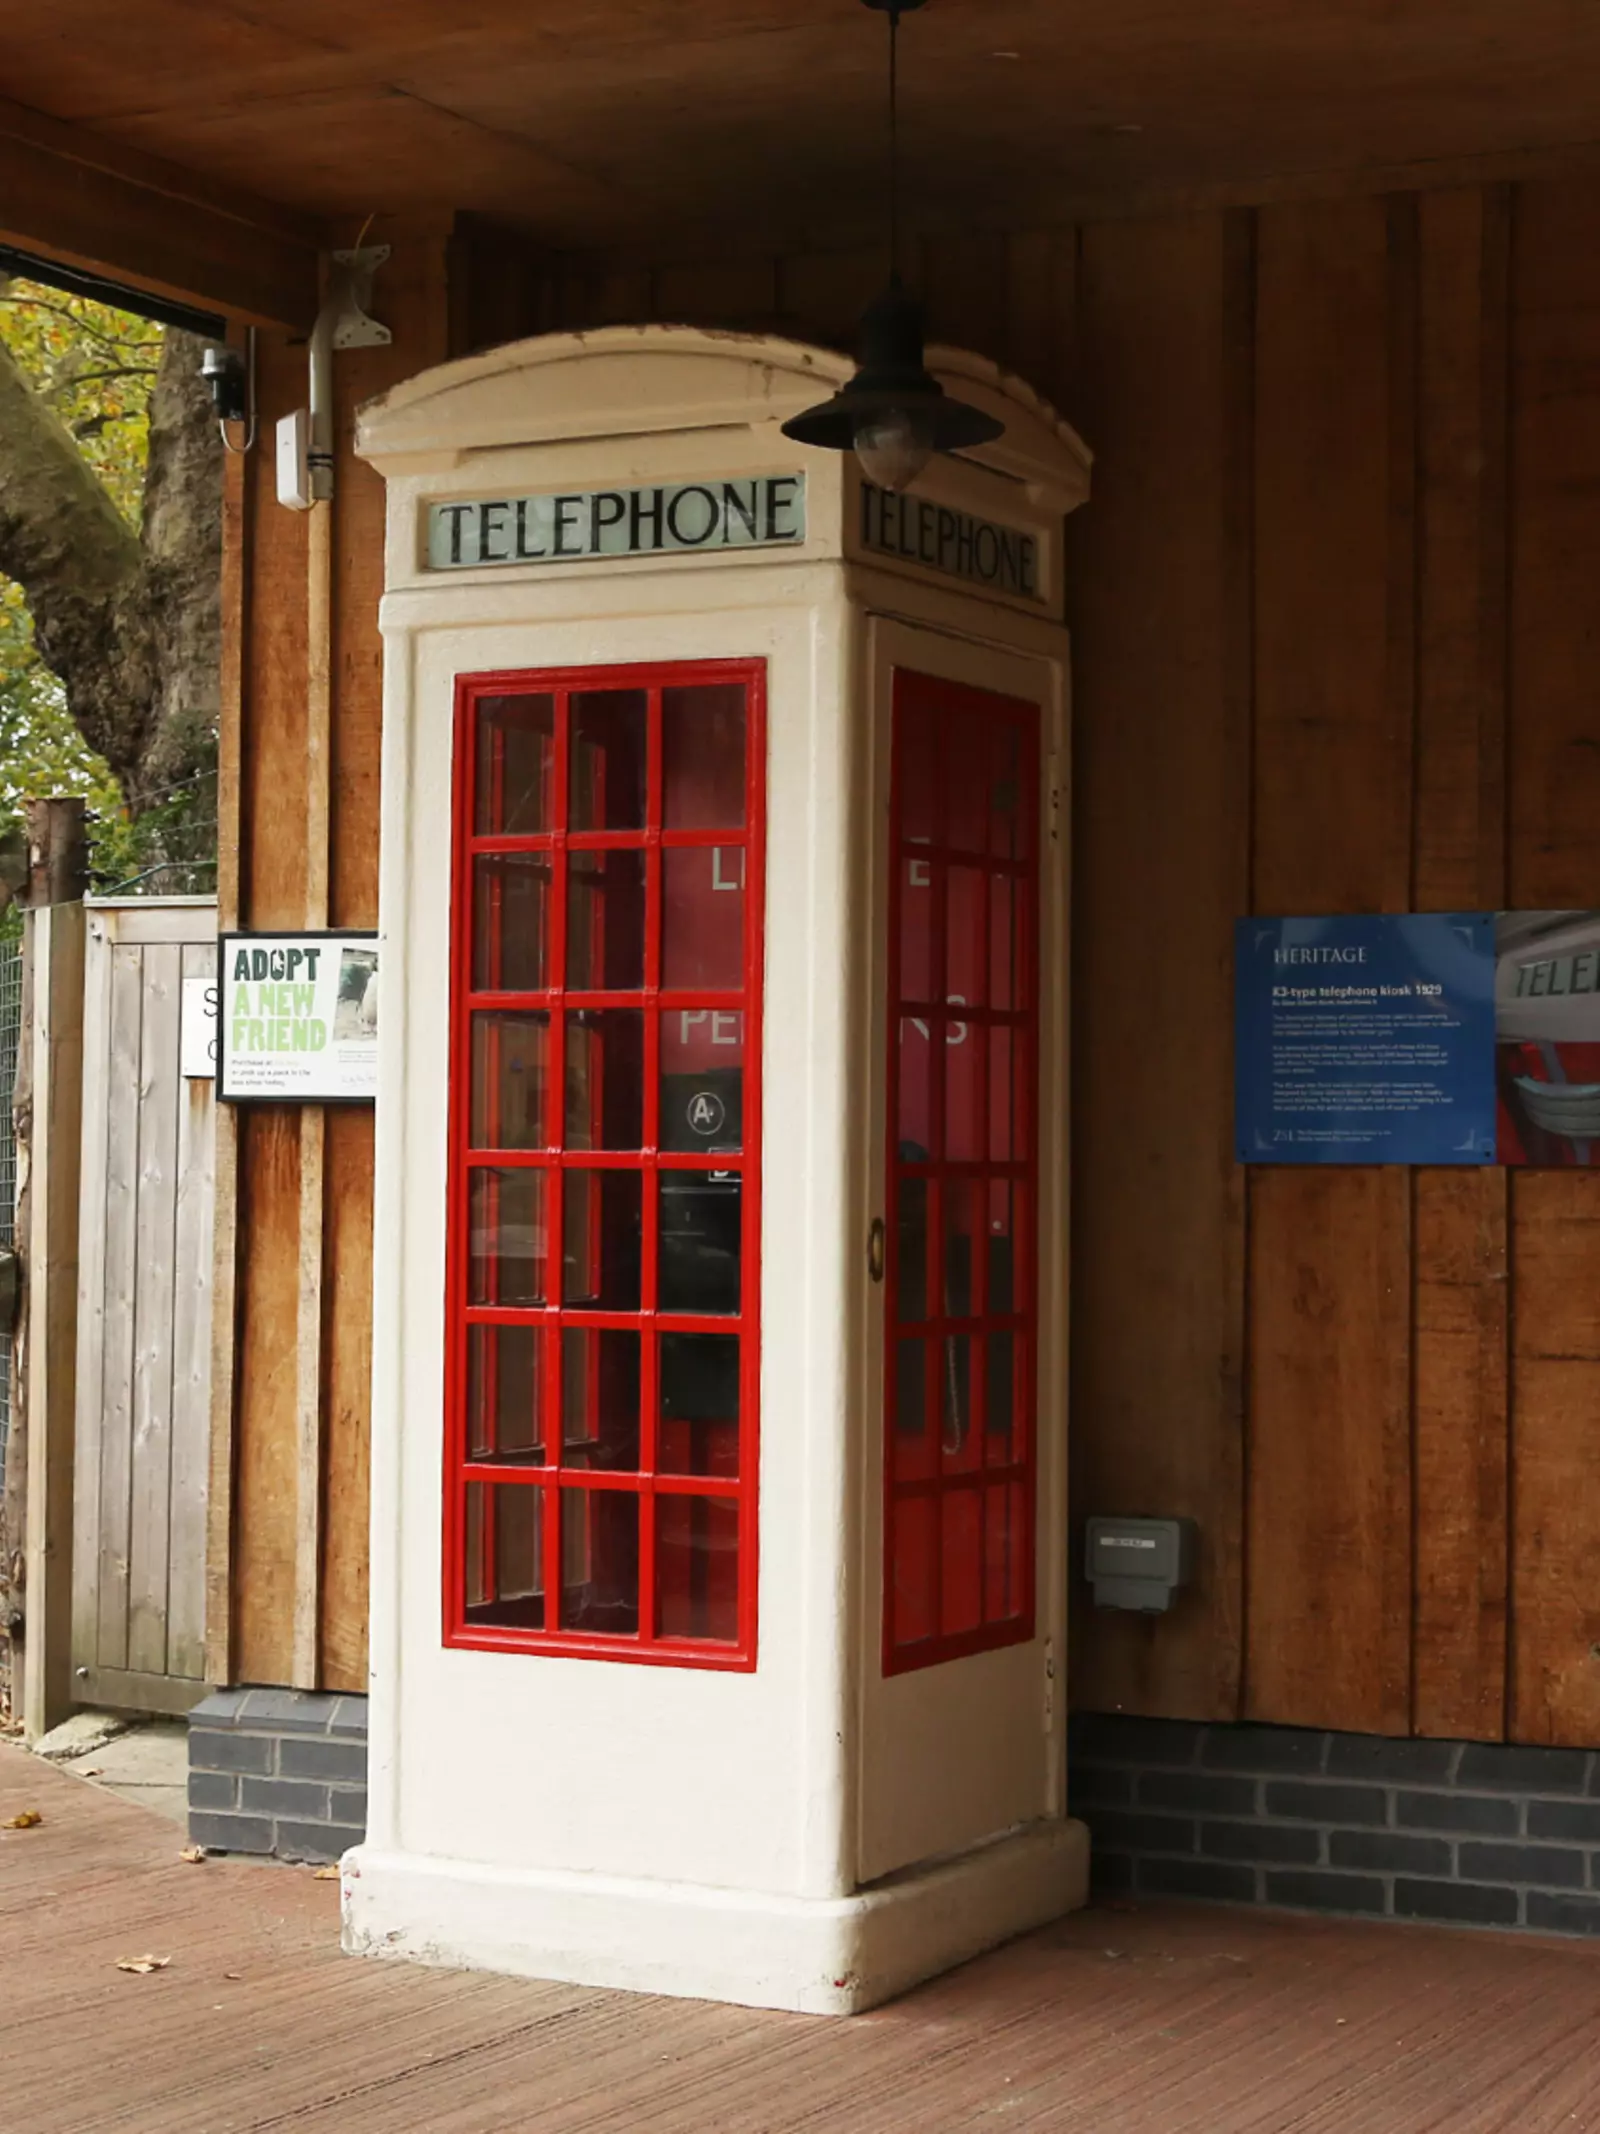 Listed telephone box at London Zoo